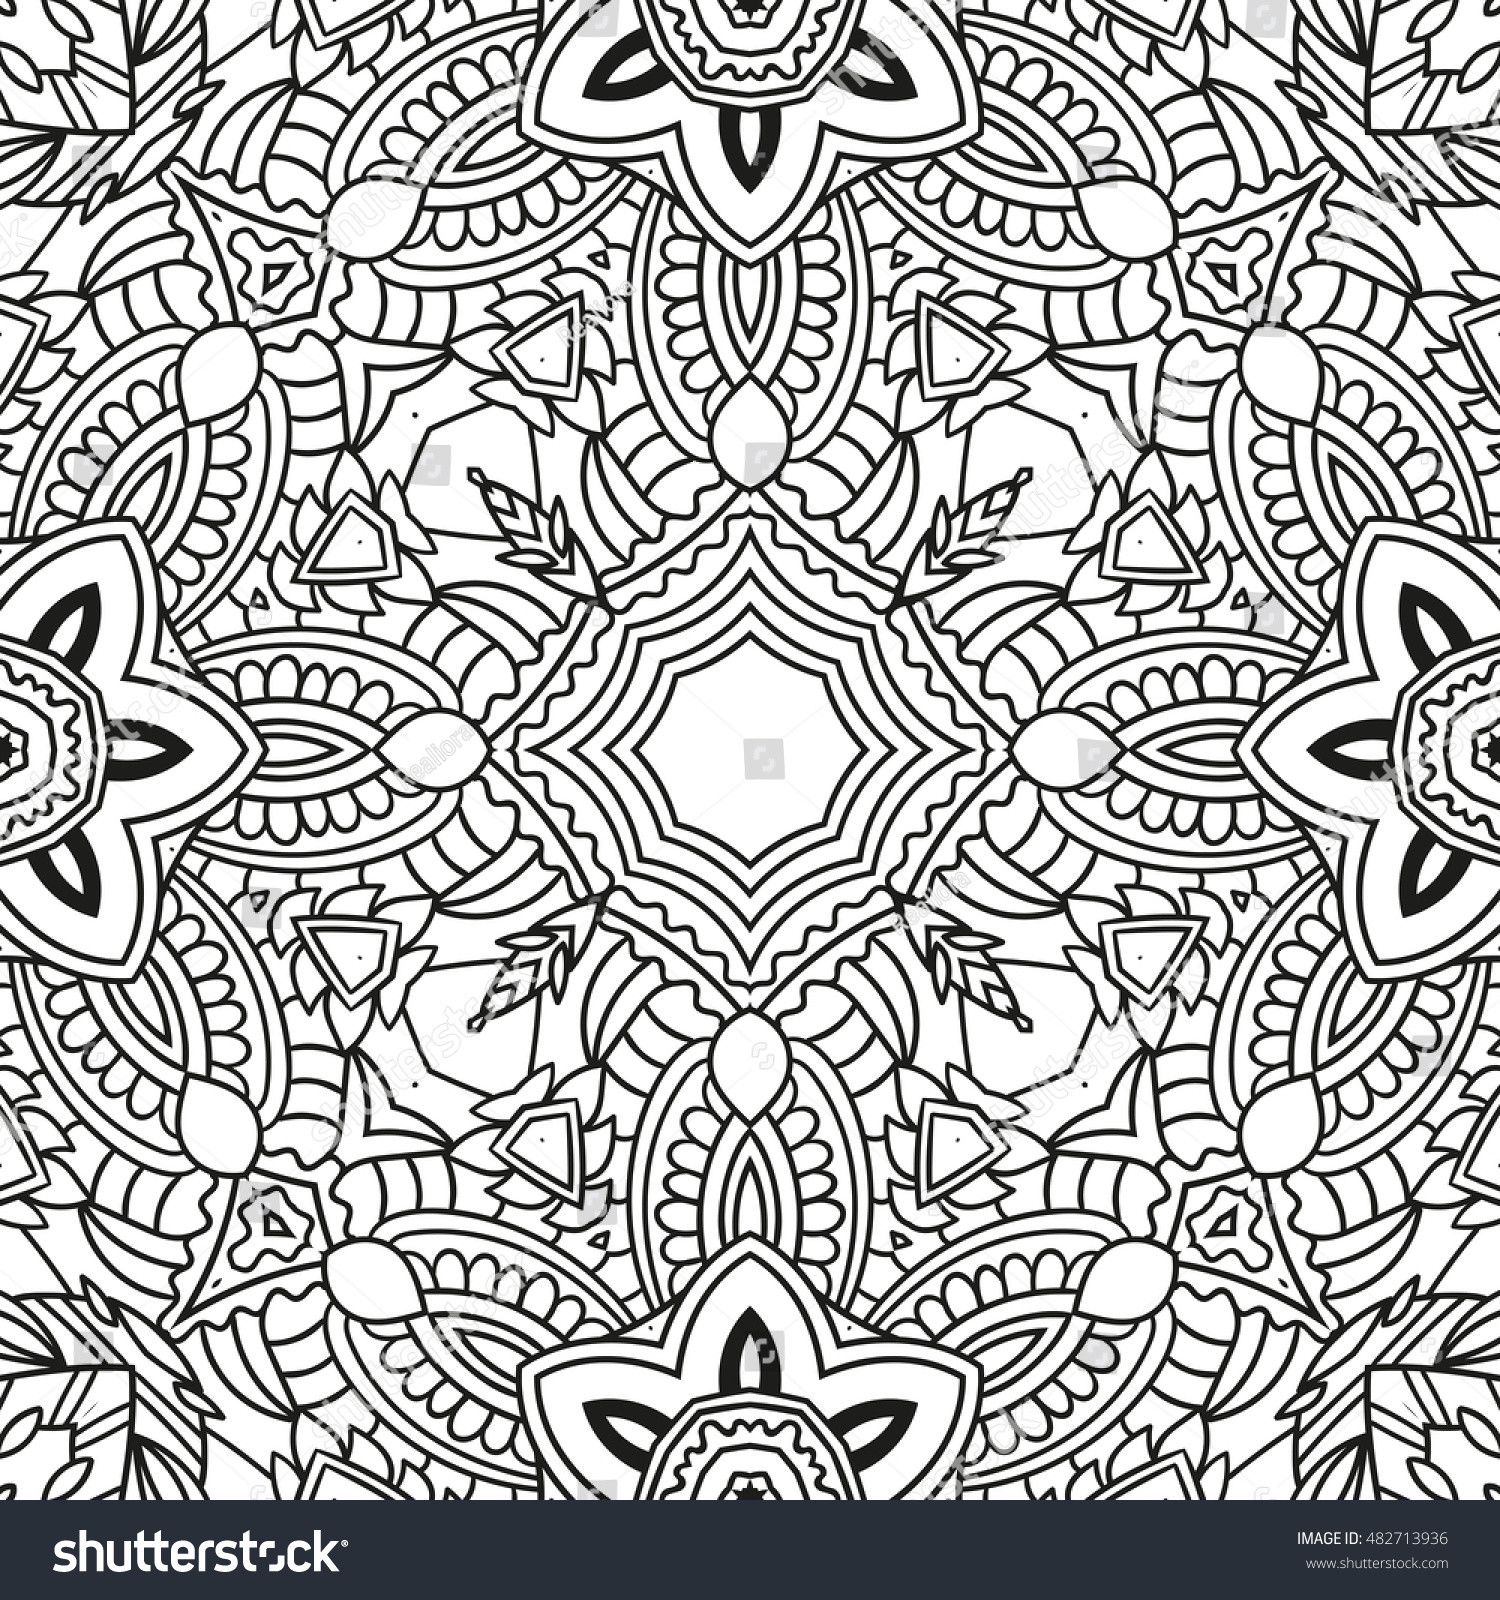 Zendoodle Coloring Book
 50 Zendoodle Coloring Pages Abstract Zendoodle Botanical